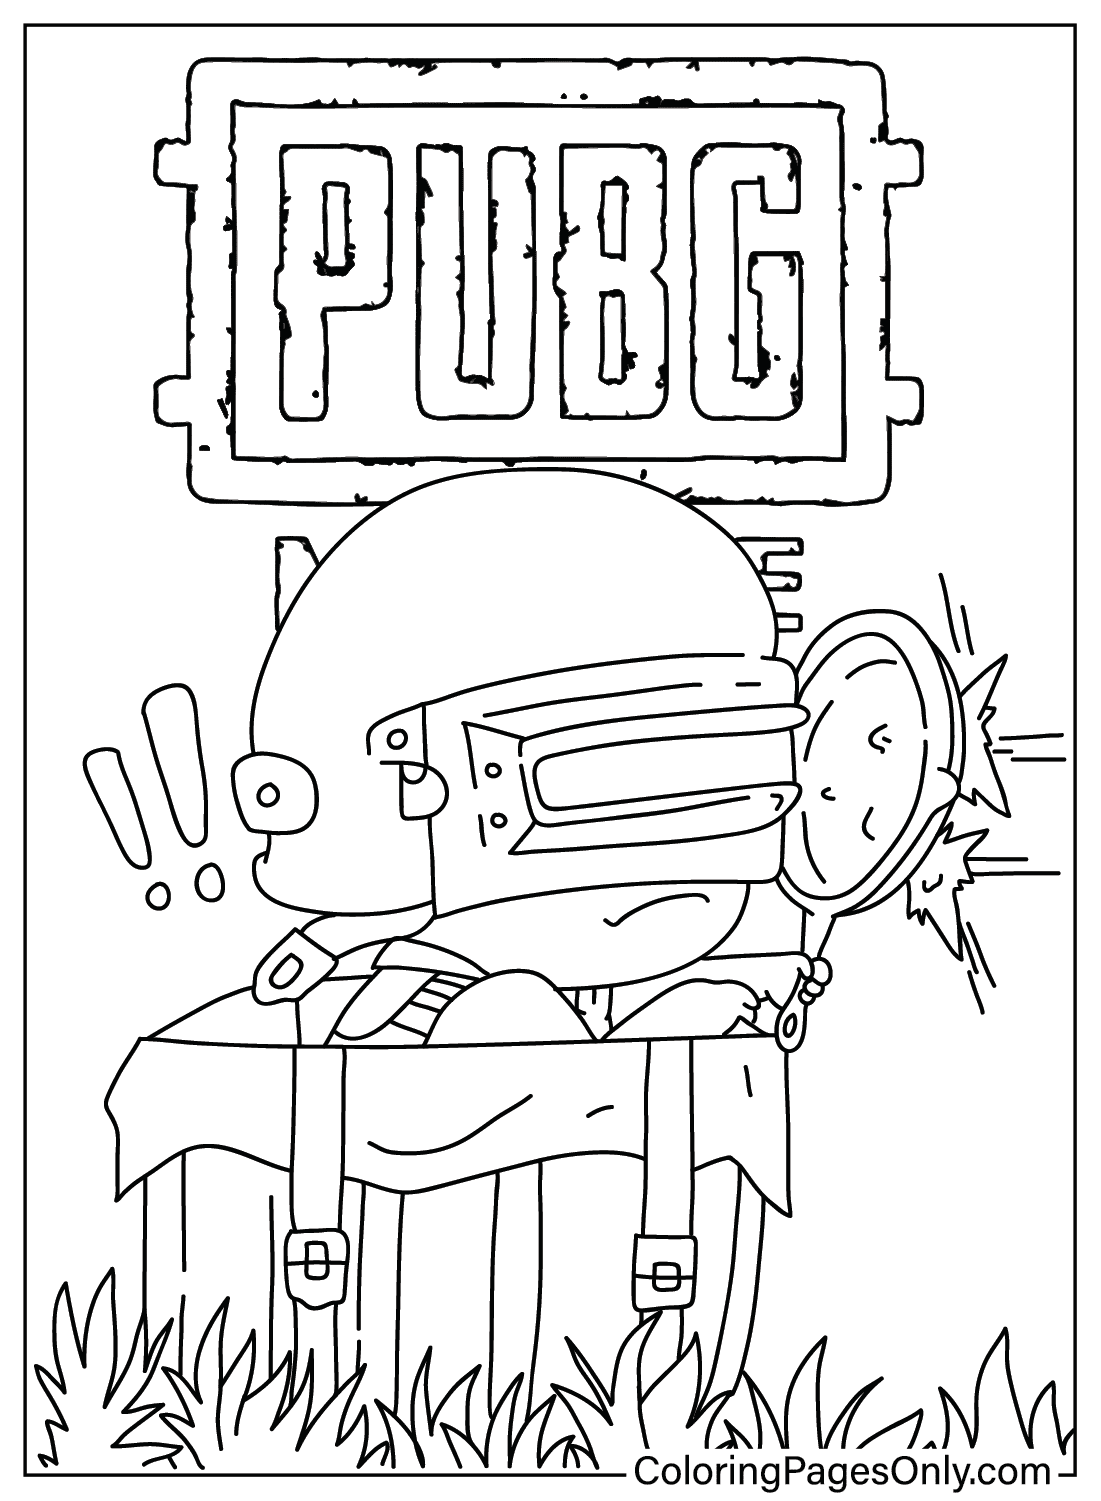 Chibi Pubg Coloring Page from PUBG